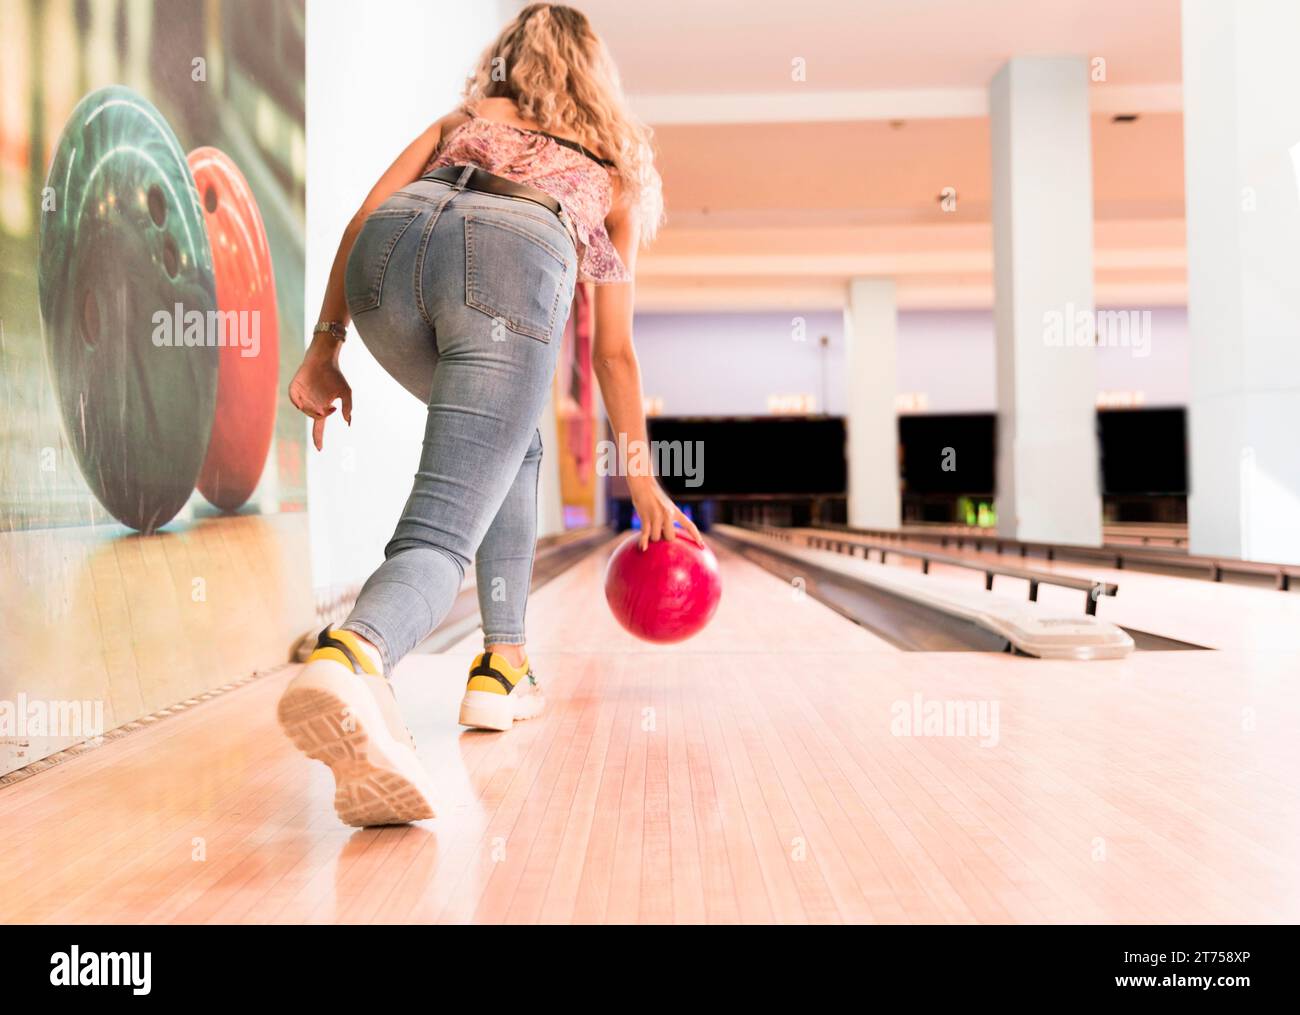 Back view woman throwing bowling ball Stock Photo